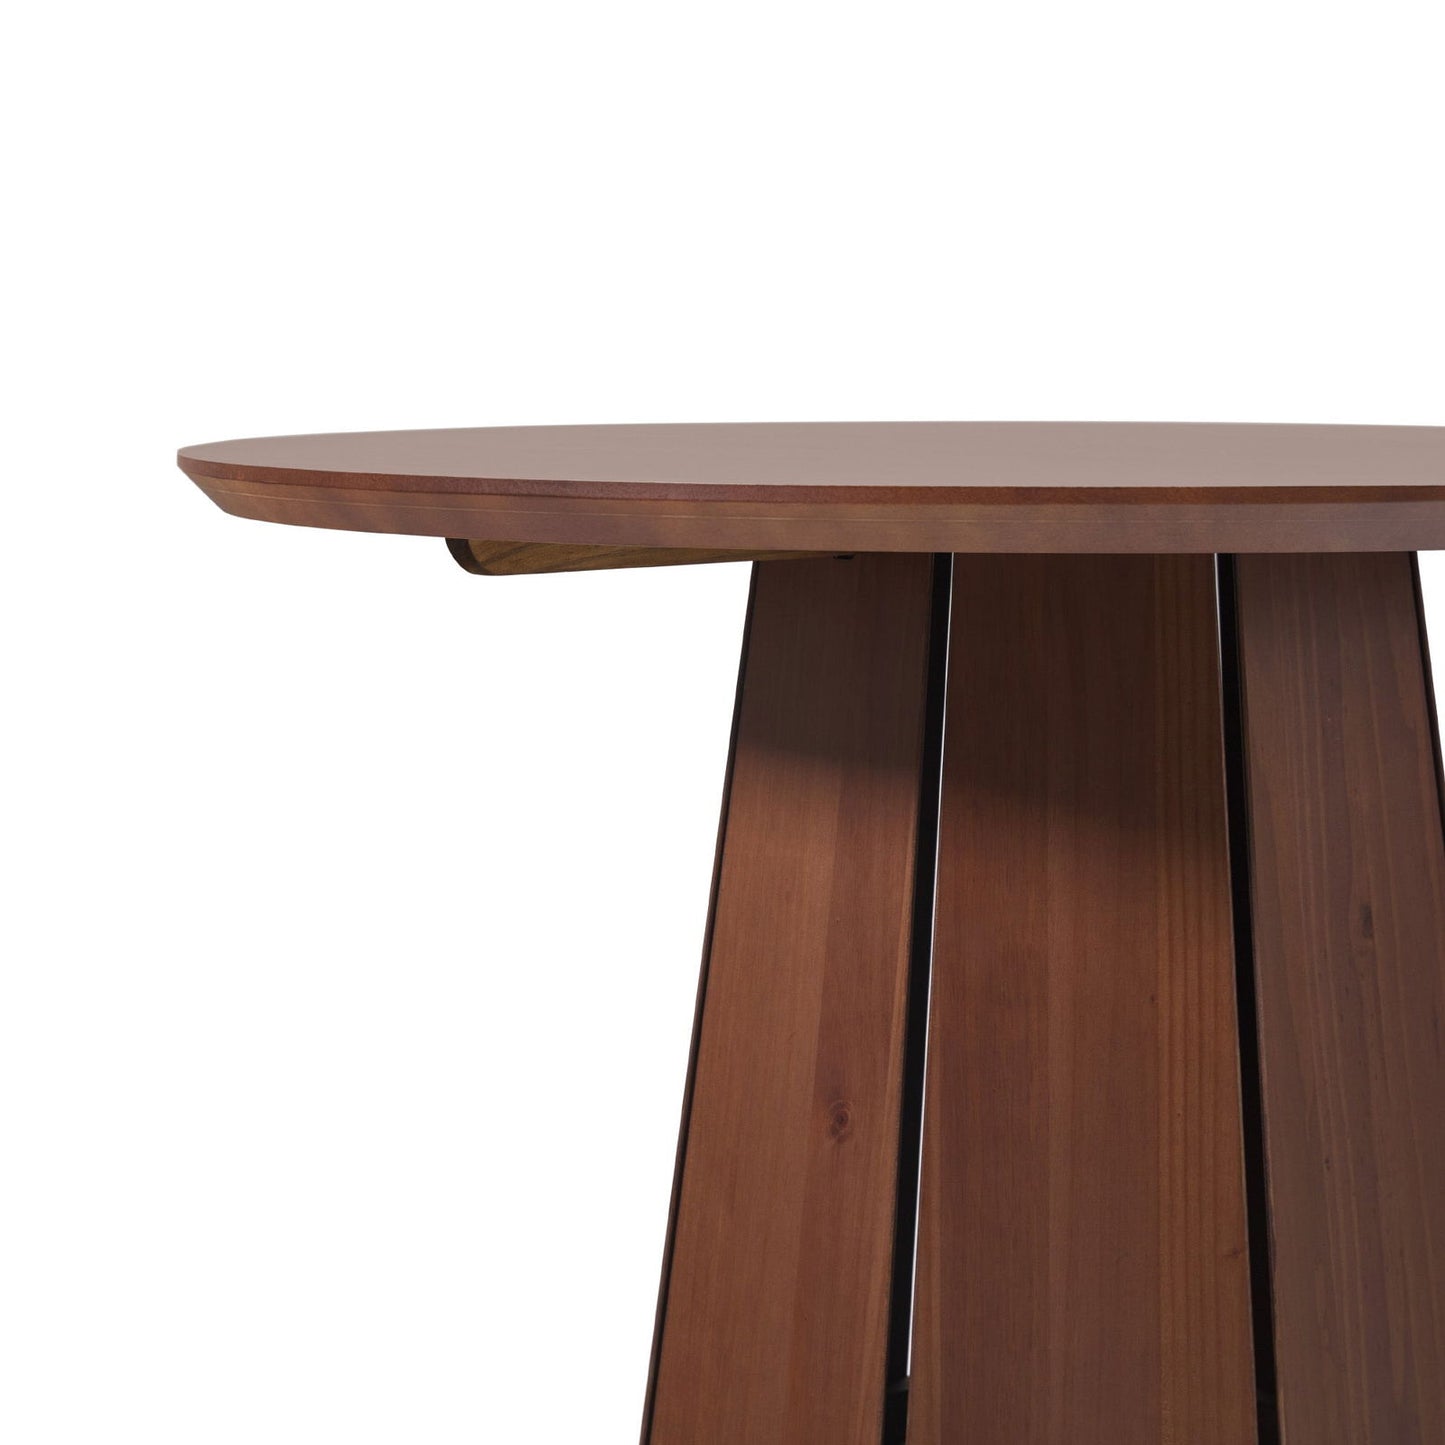 48" Round Solid Wood Pedestal Dining Table - Mac & Mabel